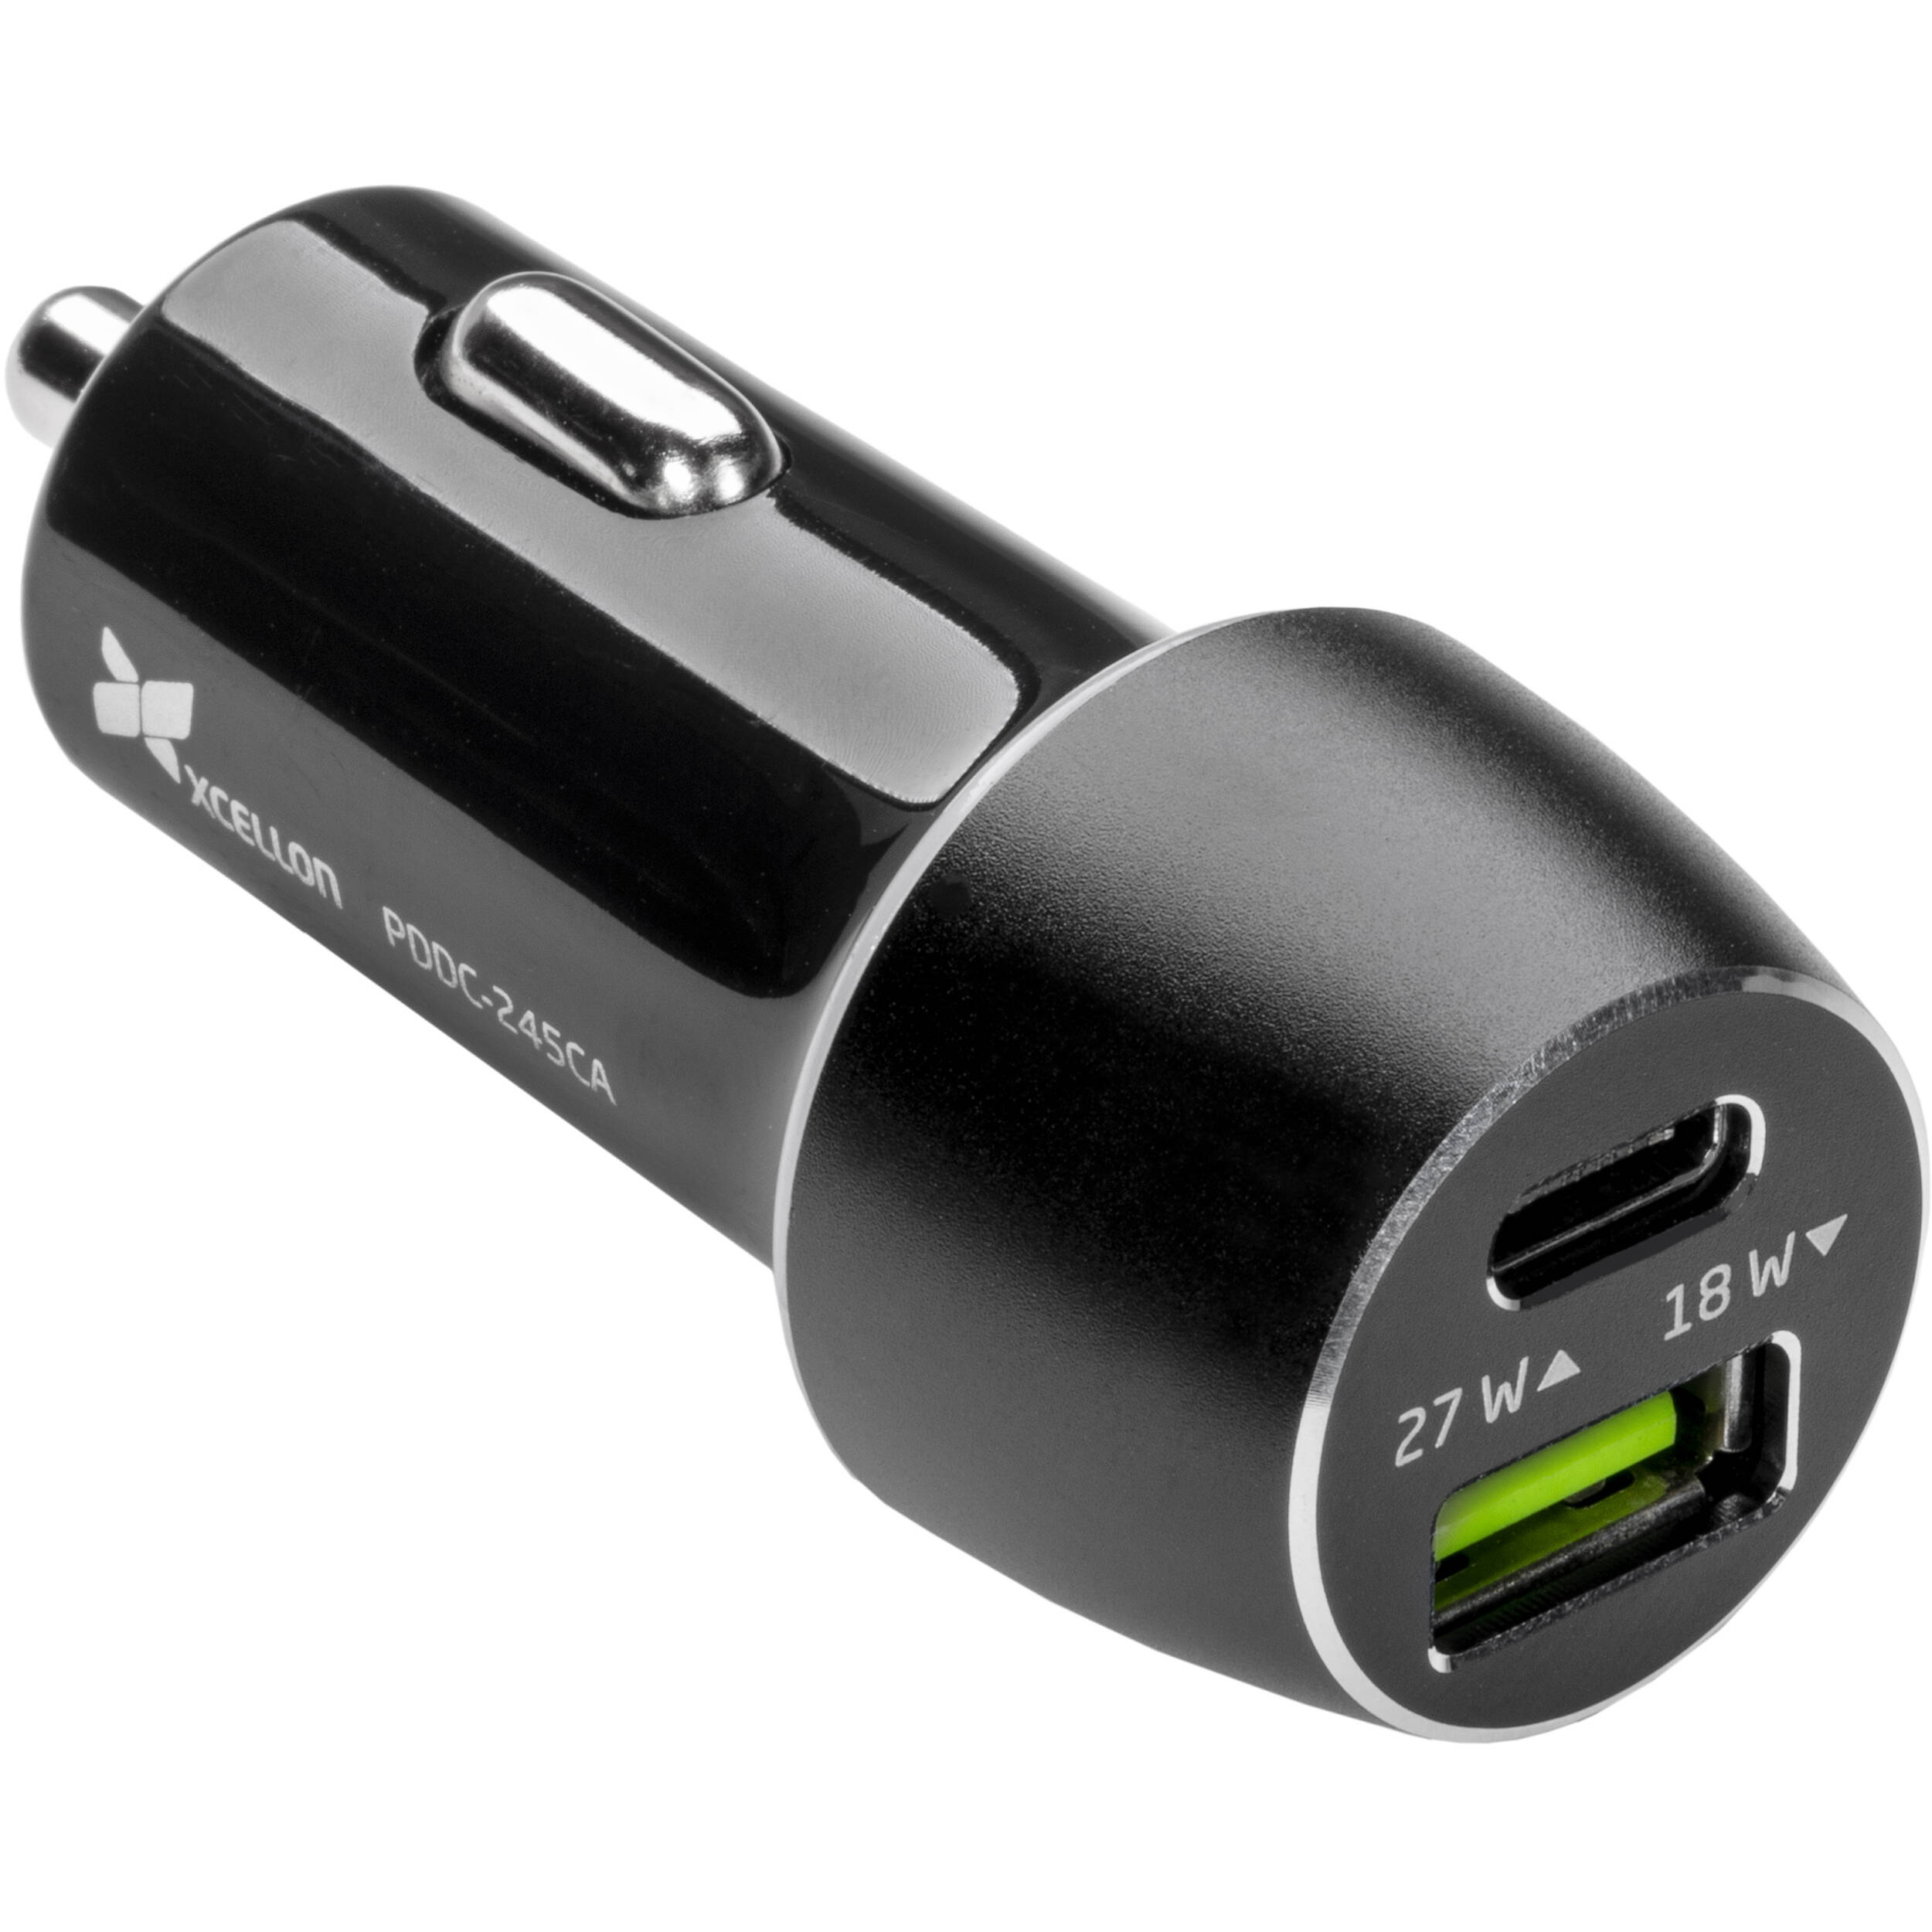 double usb charger for car